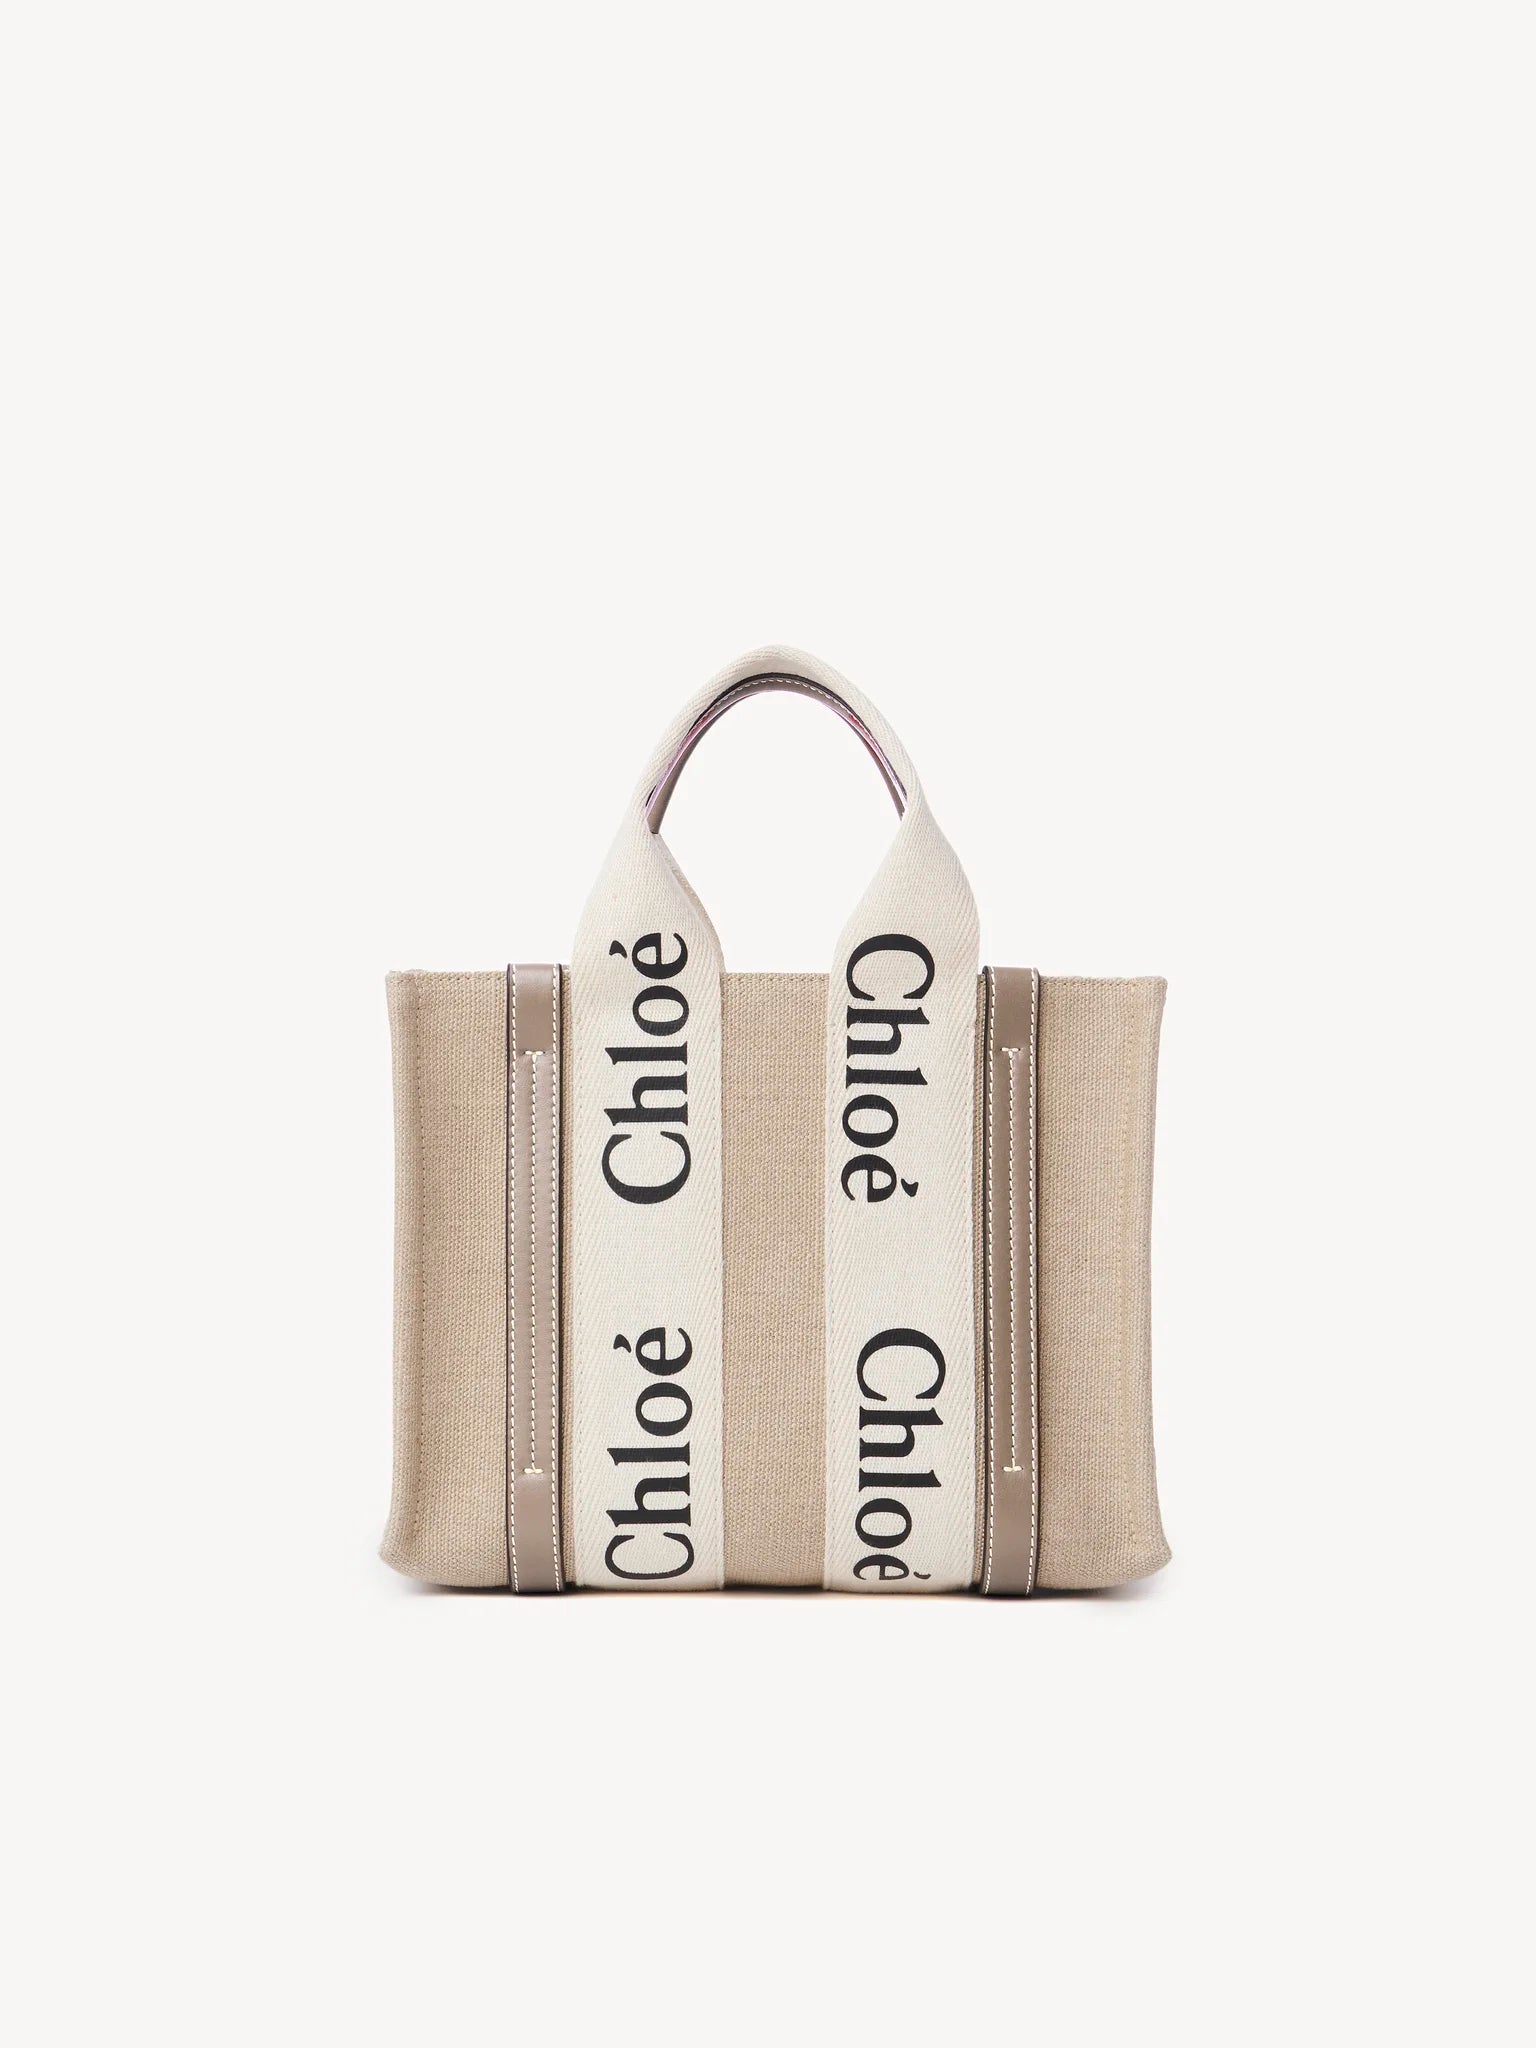 The Chloe Woody Small Tote With Strap in Musk Grey available at The New Trend Australia